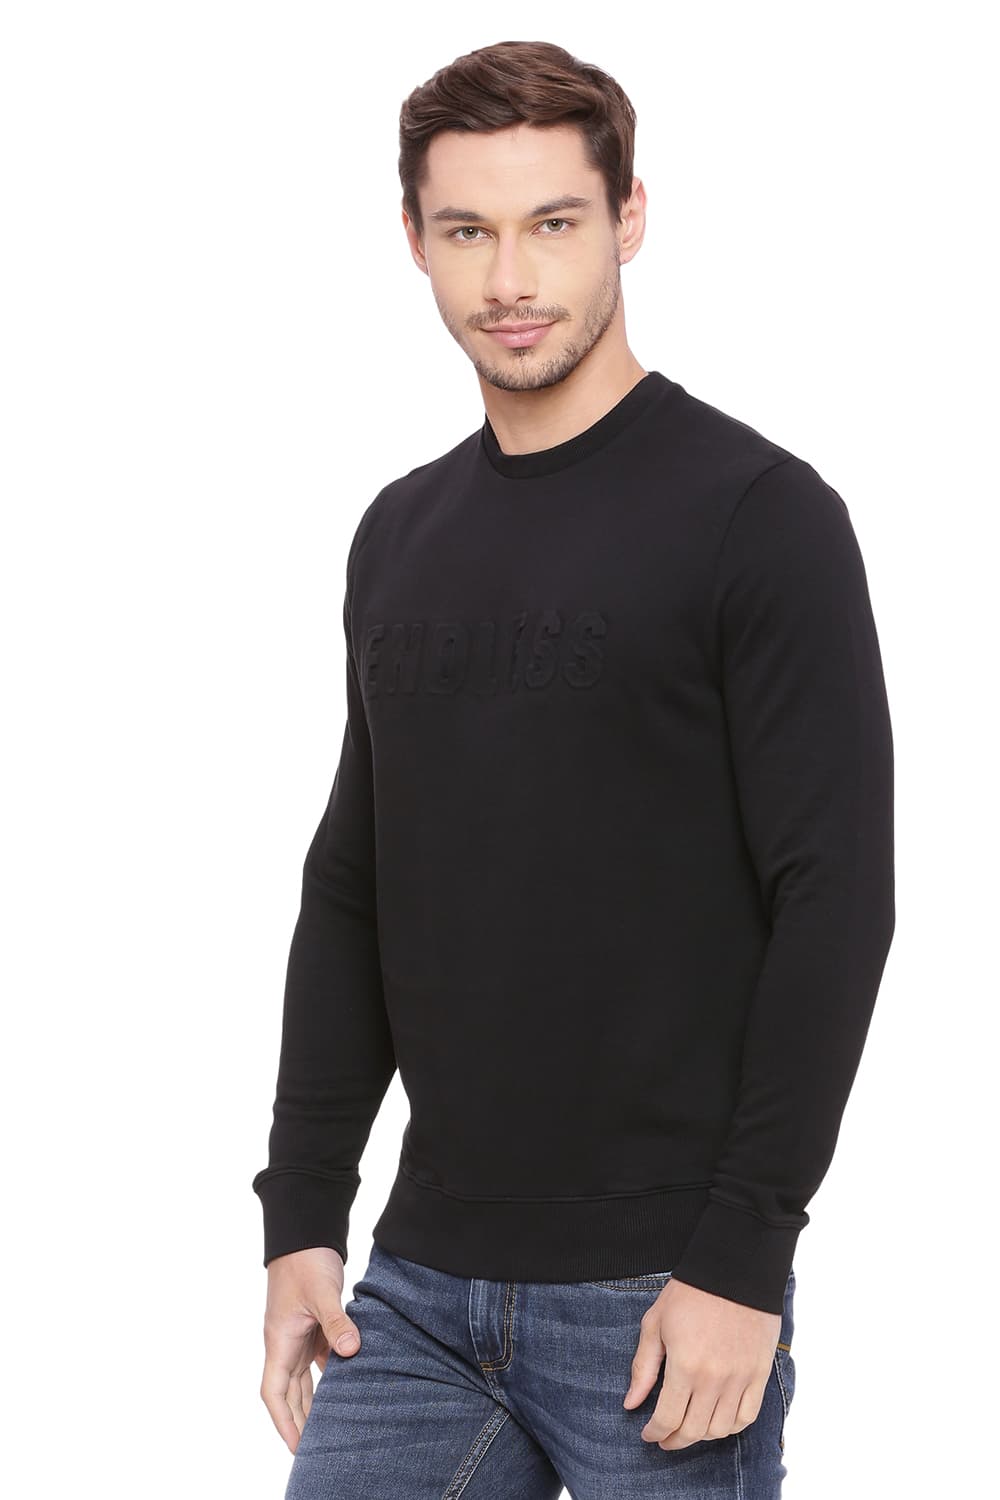 BASICS MUSCLE FIT PULLOVER SWEATER